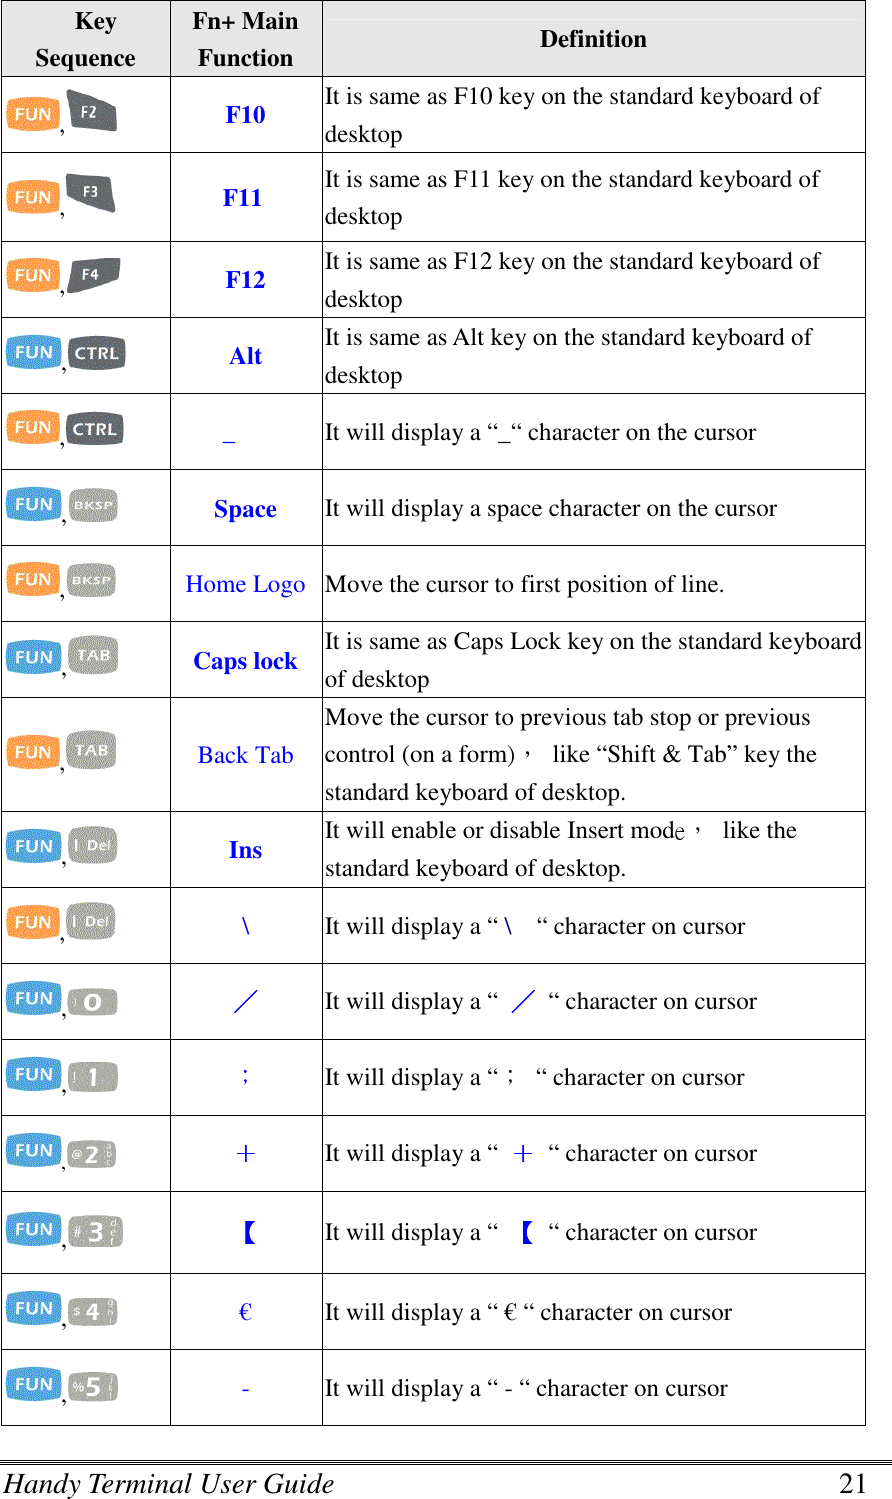 Handy Terminal User Guide      21 Key Sequence Fn+ Main Function Definition ,   F10  It is same as F10 key on the standard keyboard of desktop ,                F11  It is same as F11 key on the standard keyboard of desktop ,   F12  It is same as F12 key on the standard keyboard of desktop ,   Alt  It is same as Alt key on the standard keyboard of desktop ,                _  It will display a “_“ character on the cursor ,   Space  It will display a space character on the cursor ,   Home Logo Move the cursor to first position of line. ,   Caps lock  It is same as Caps Lock key on the standard keyboard of desktop   ,   Back Tab Move the cursor to previous tab stop or previous control (on a form)，  like “Shift &amp; Tab” key the standard keyboard of desktop. ,   Ins  It will enable or disable Insert mode，  like the standard keyboard of desktop. ,   \ It will display a “ \    “ character on cursor ,   ／／／／ It will display a “  ／／／／  “ character on cursor ,   ； It will display a “；  “ character on cursor ,       ＋＋＋＋ It will display a “  ＋＋＋＋  “ character on cursor ,   【【【【    It will display a “  【【【【 “ character on cursor ,   € It will display a “ € “ character on cursor ,   - It will display a “ - “ character on cursor 